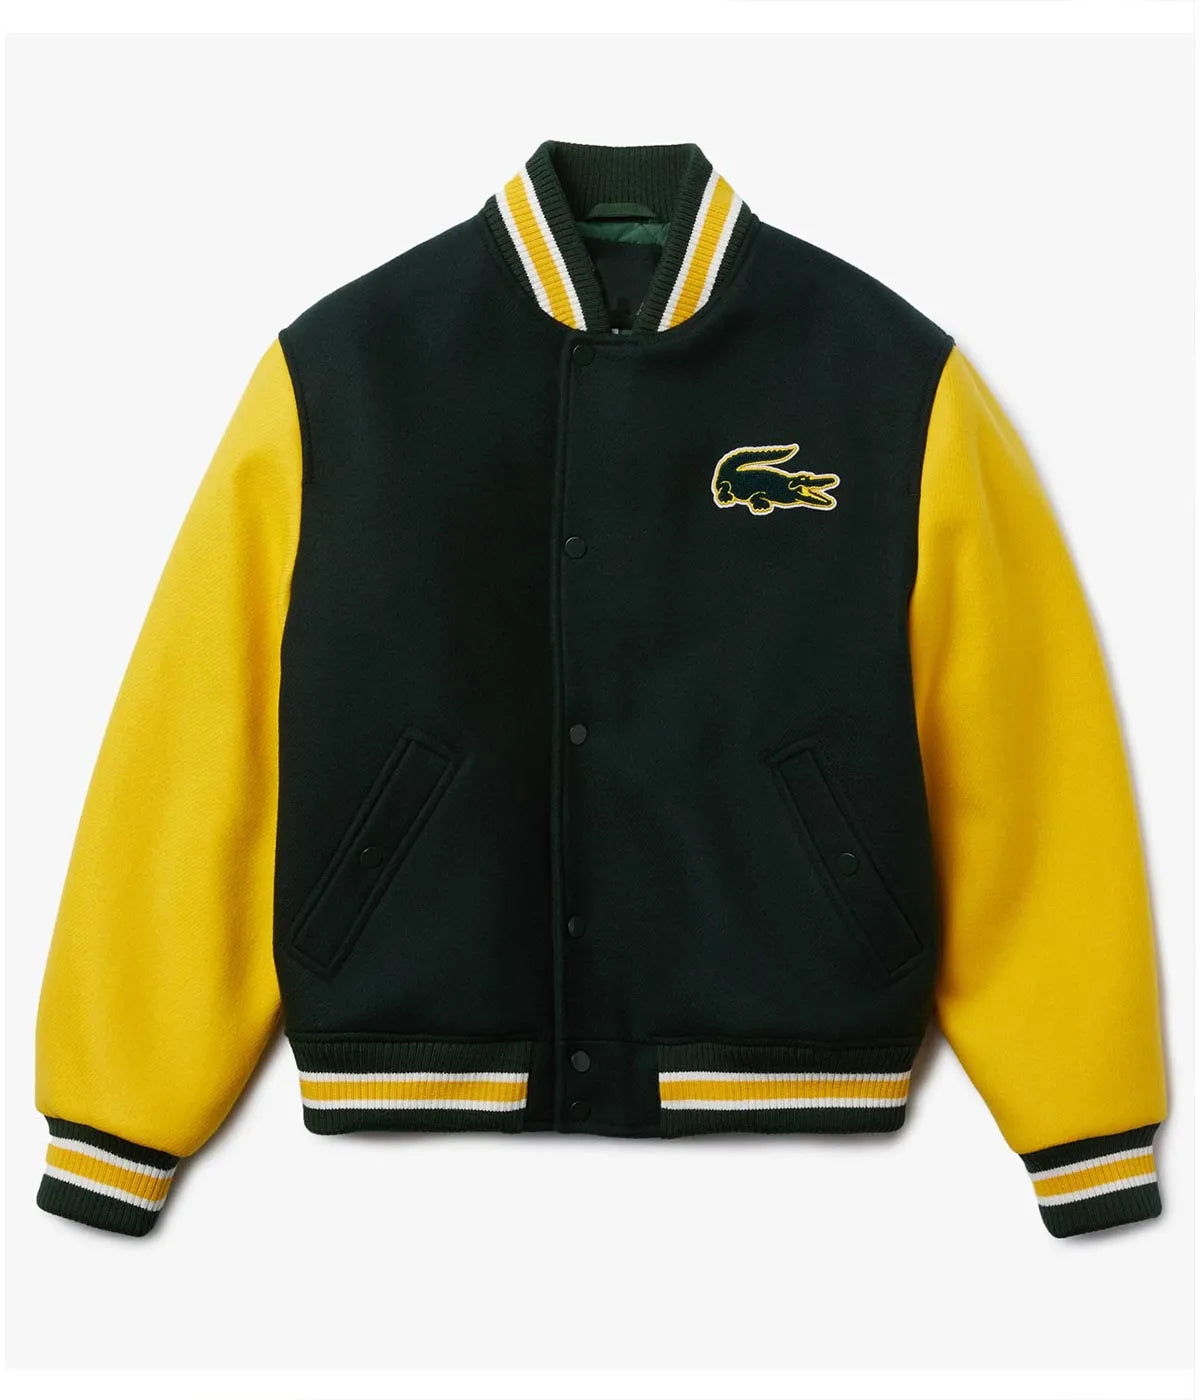 Lacoste Live Two-Tone Varsity Jacket - PINESMAX